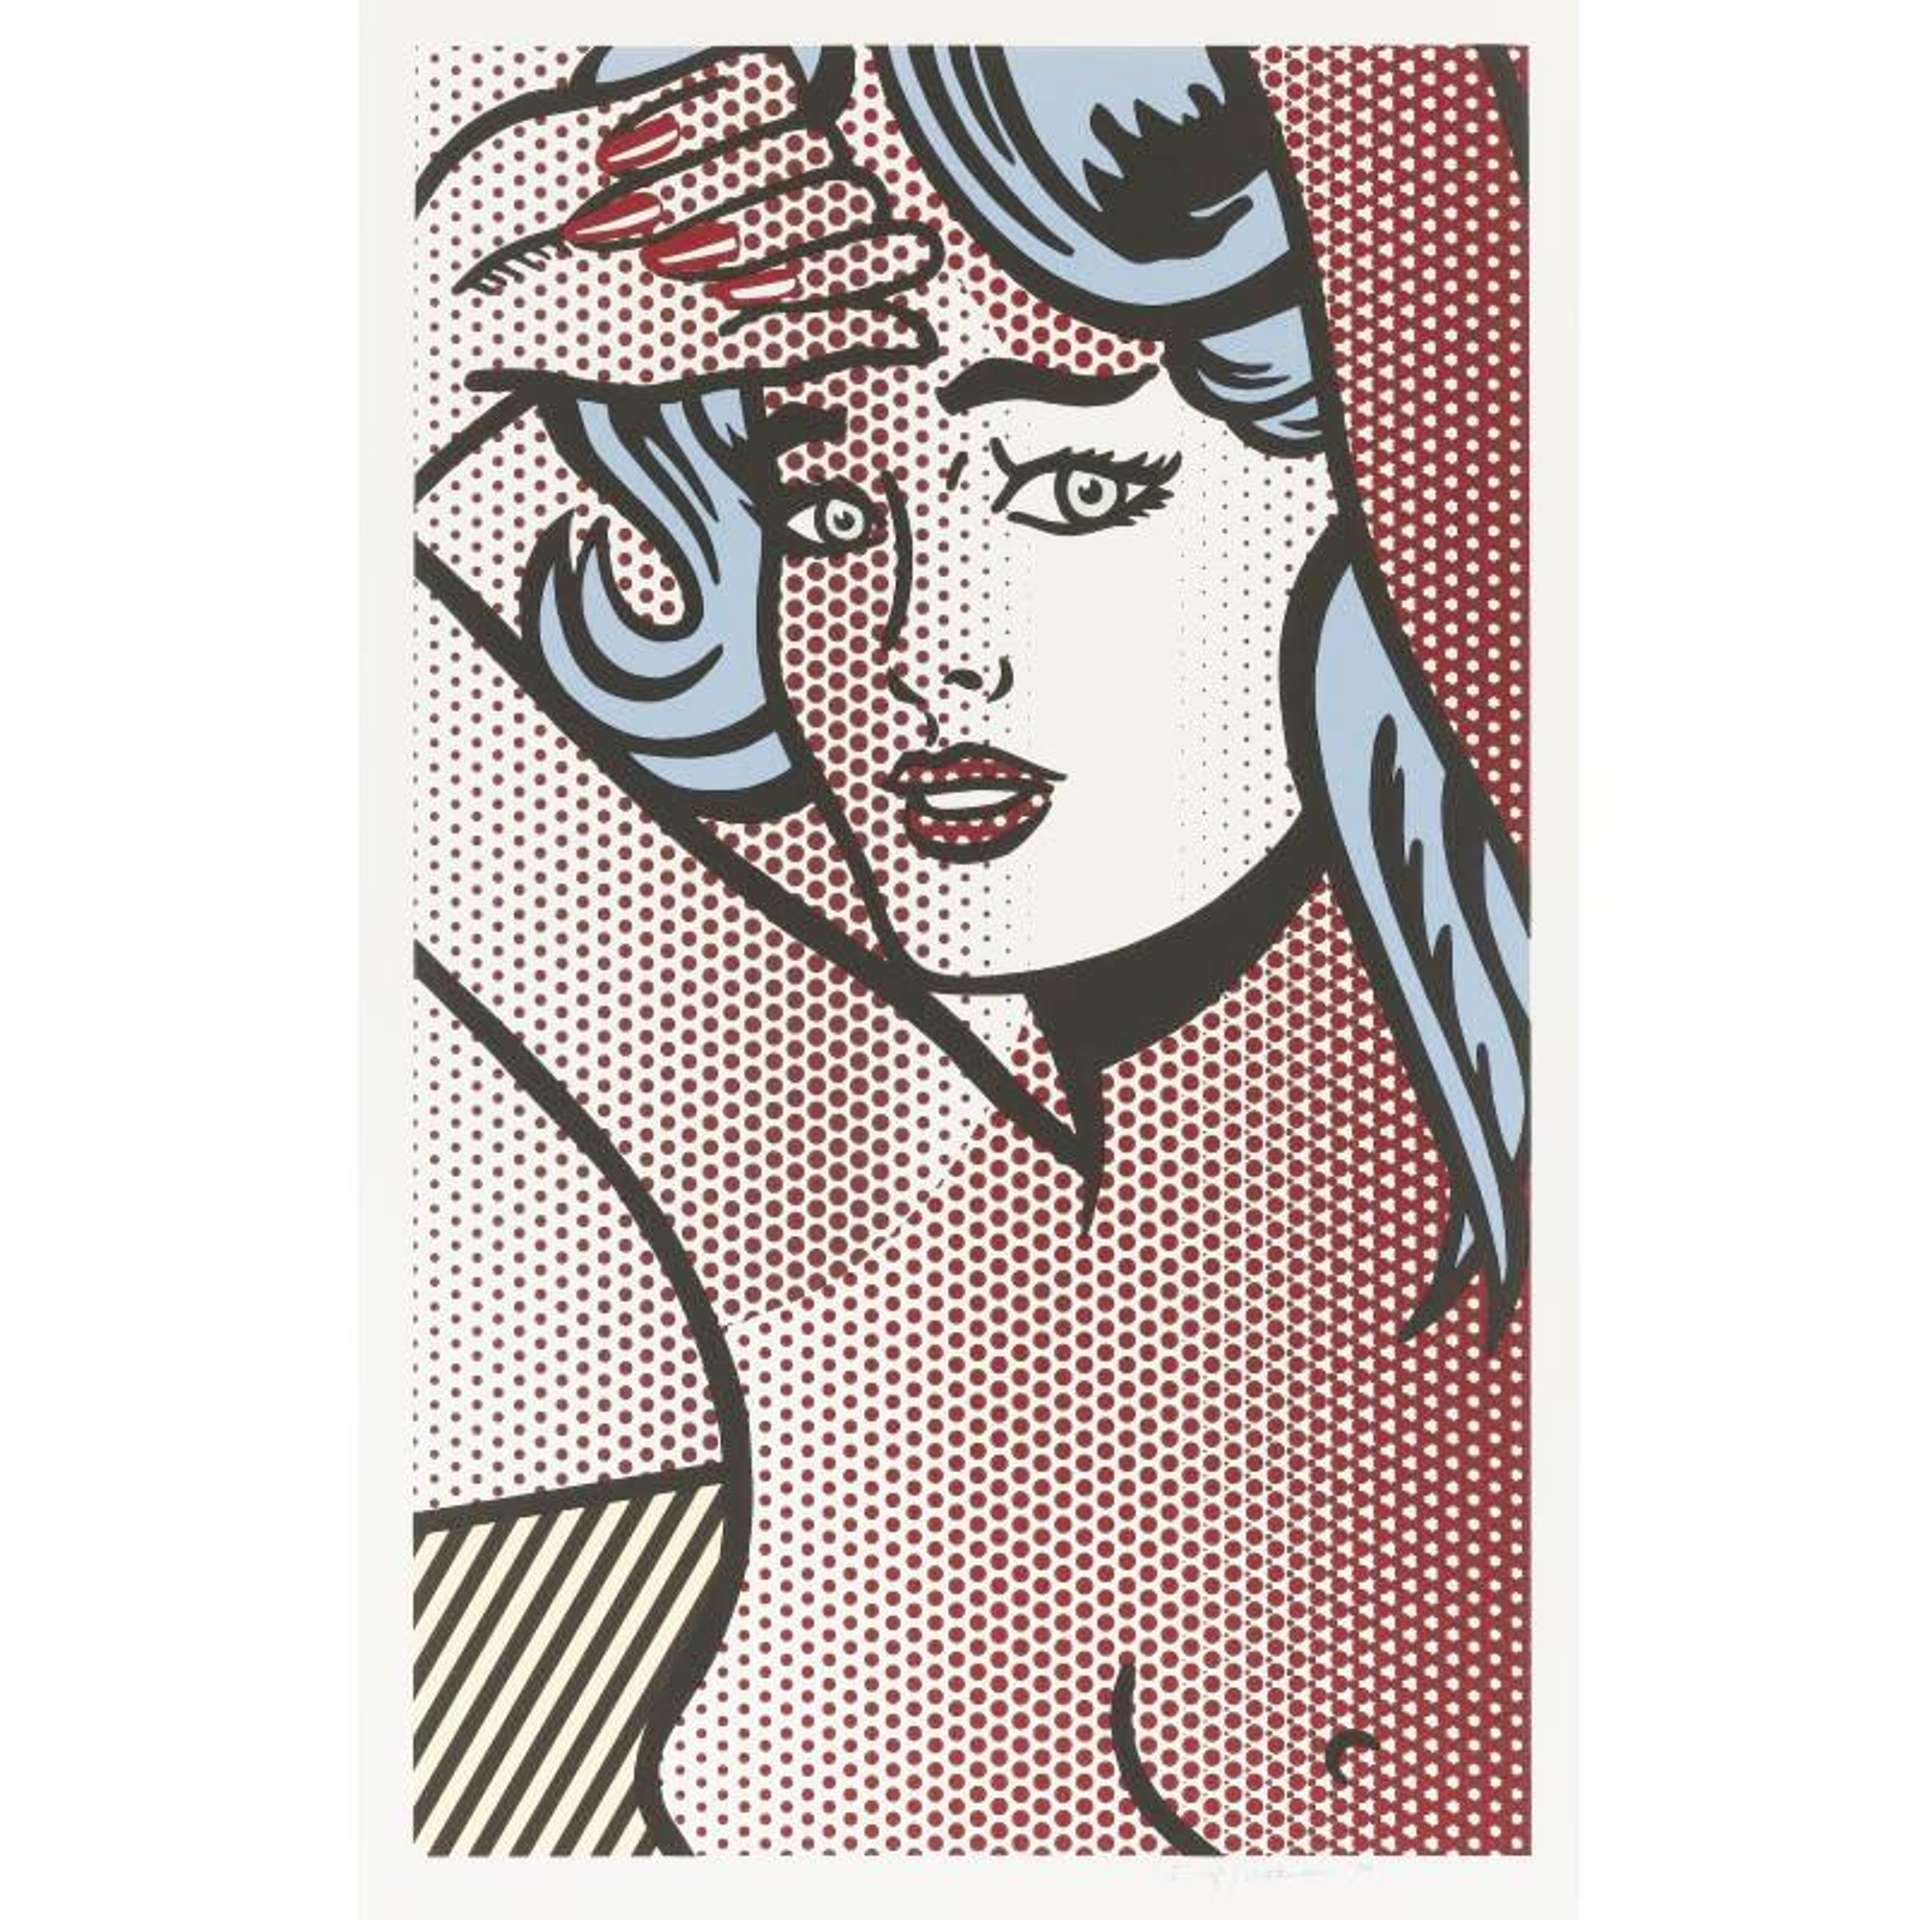 A graphic, comic book-inspired portrait of a nude woman. Thick black outlines delineate her face and body, with Ben Day dots representing her skin tone.